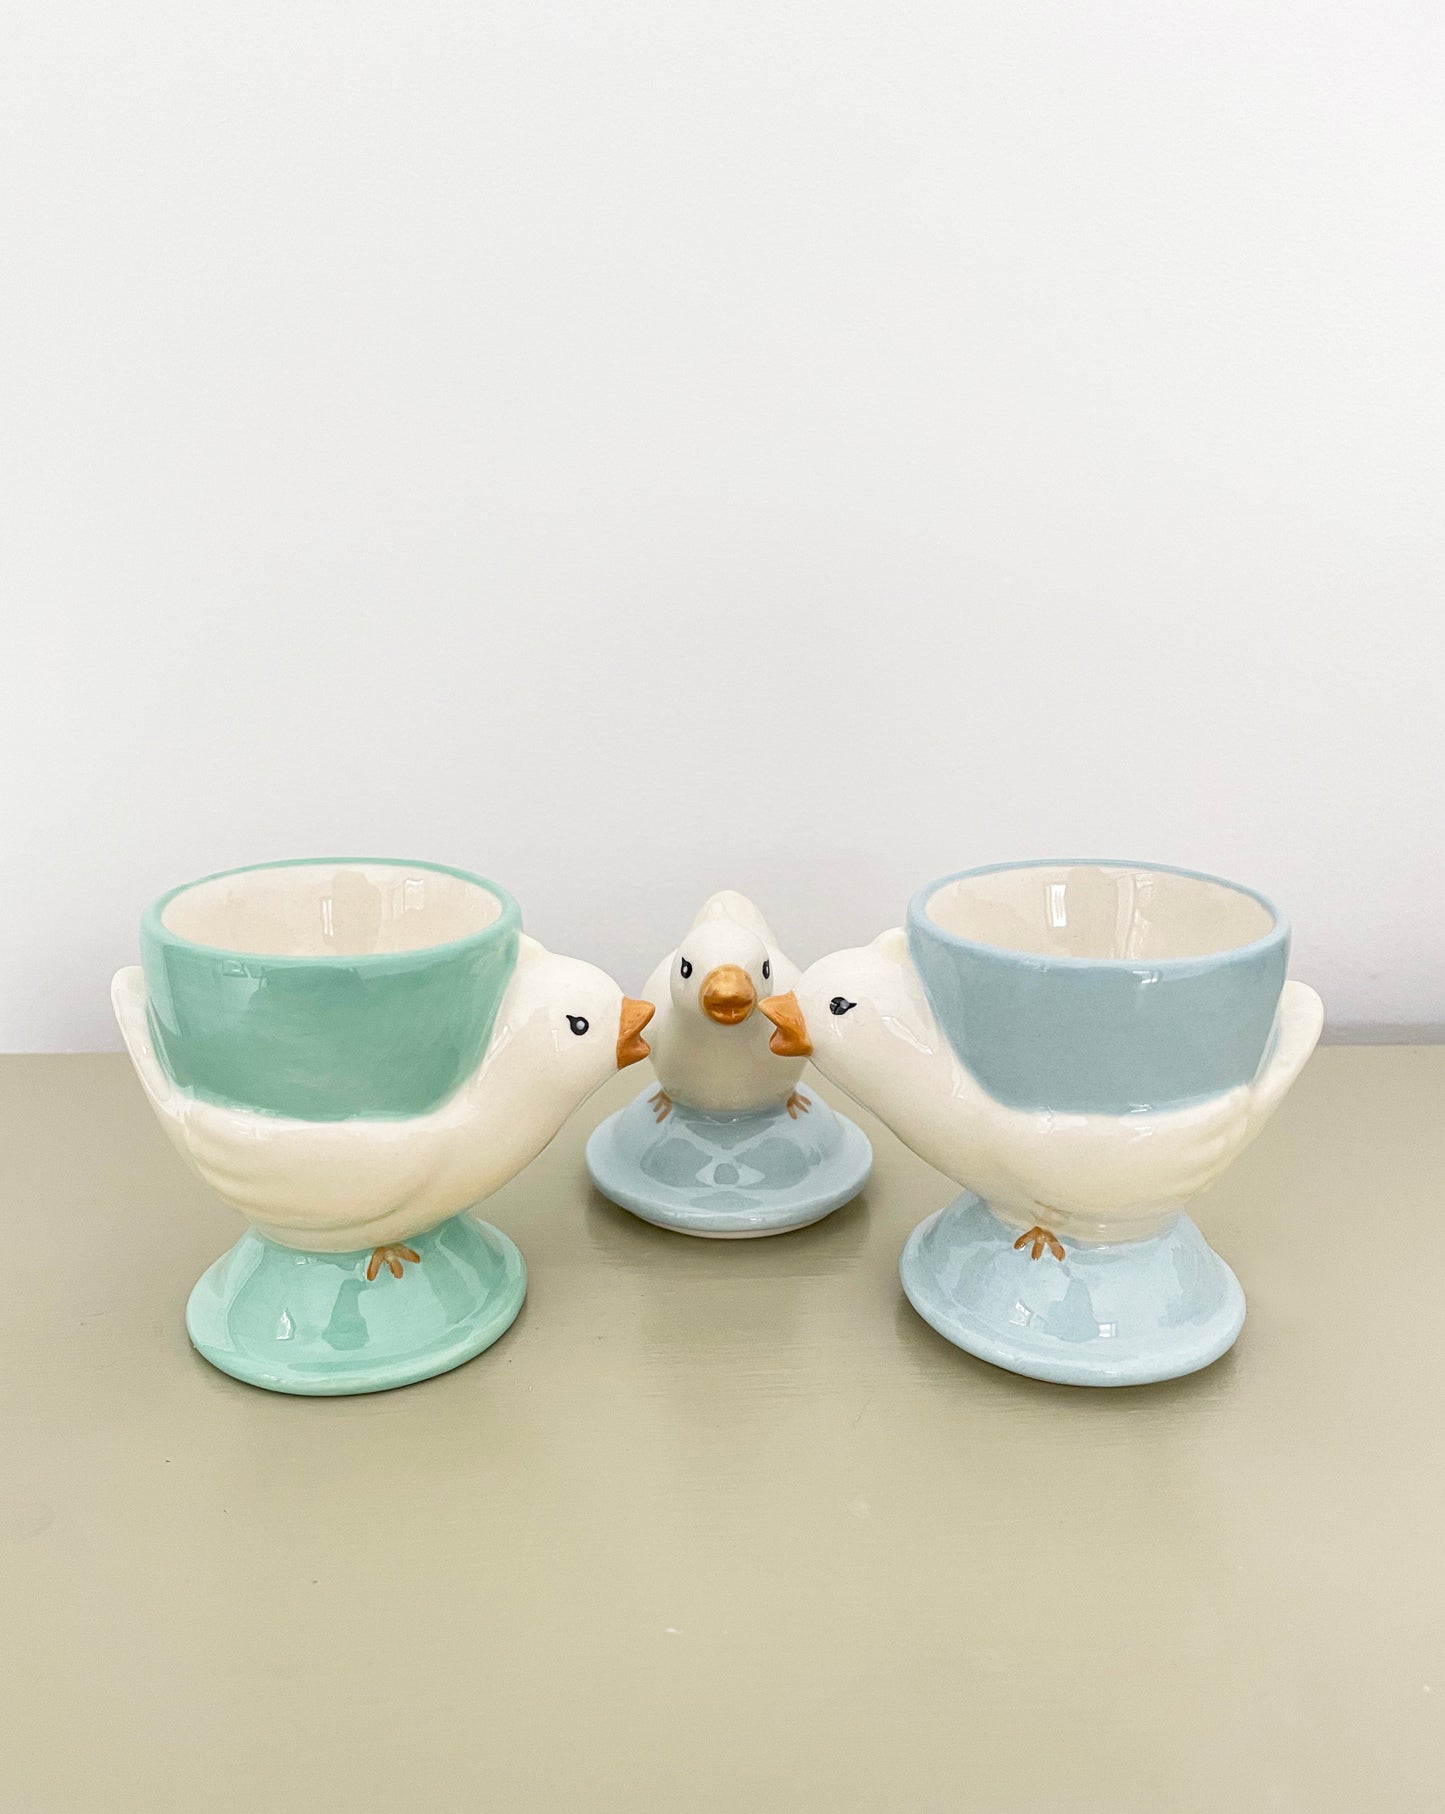 Chicken and Egg Cups, stacked set of 3